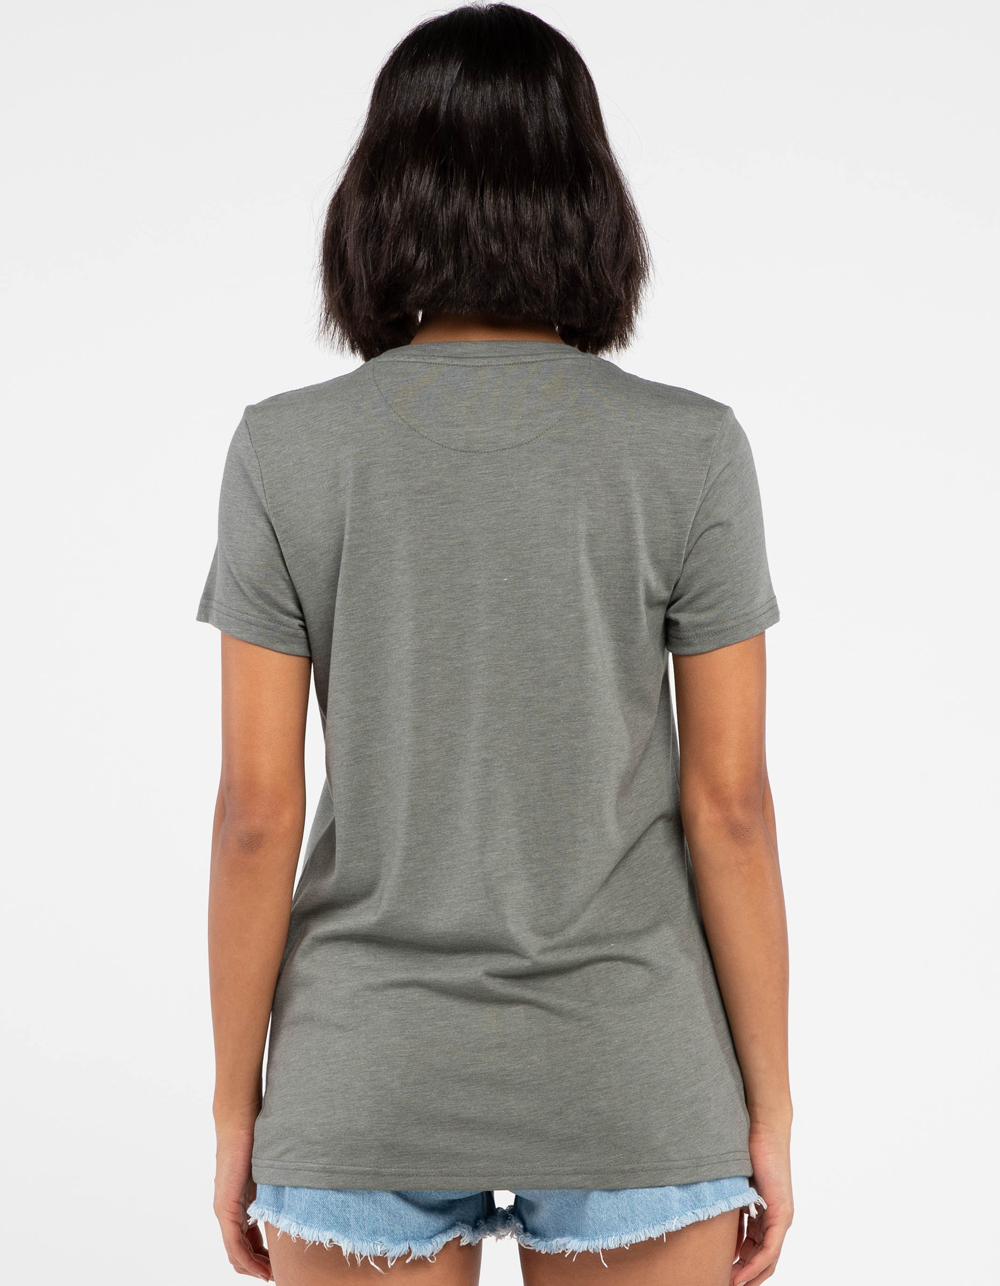 TENTREE Willow Square Womens Tee - AGAVEE | Tillys